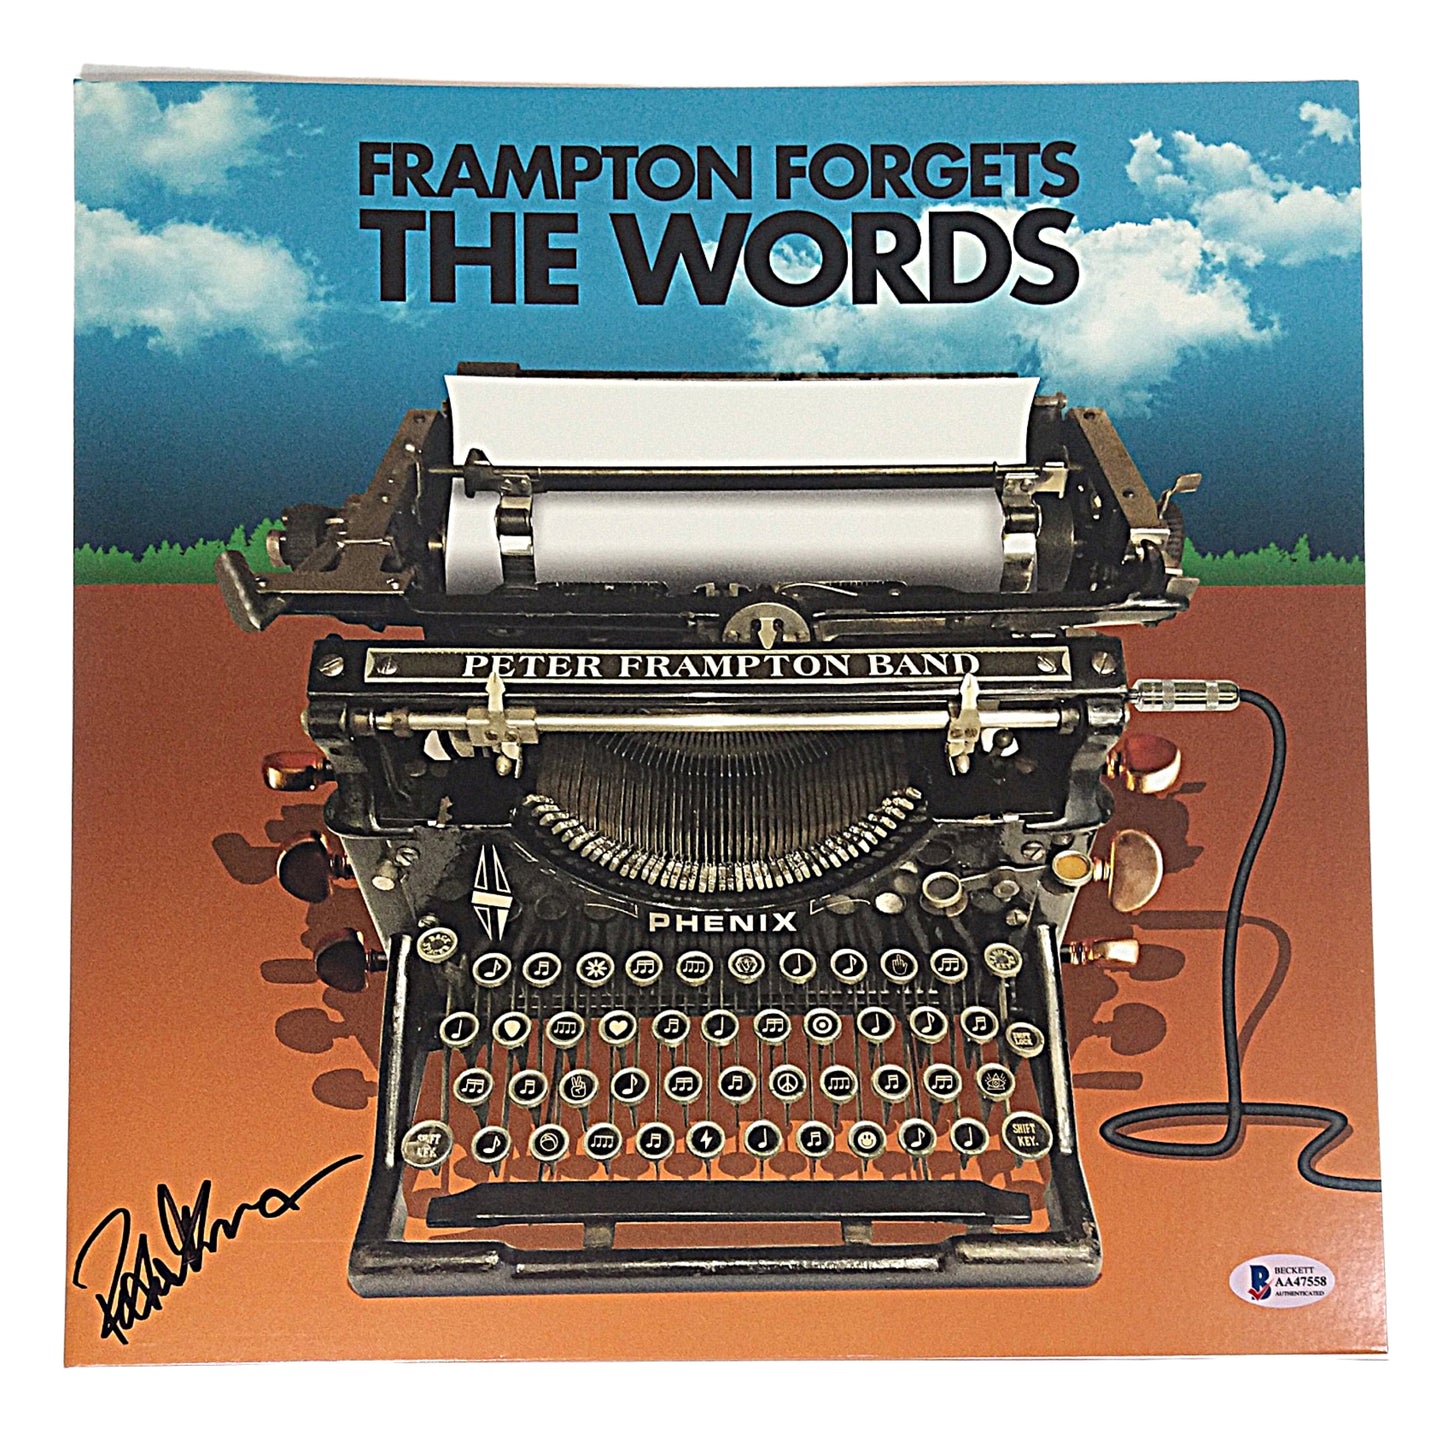 Music- Autographed- Peter Frampton Signed Peter Frampton Forgets The Words Vinyl Record Album Cover Bundled with Brand-New Sealed Album Beckett BAS Authentication 103